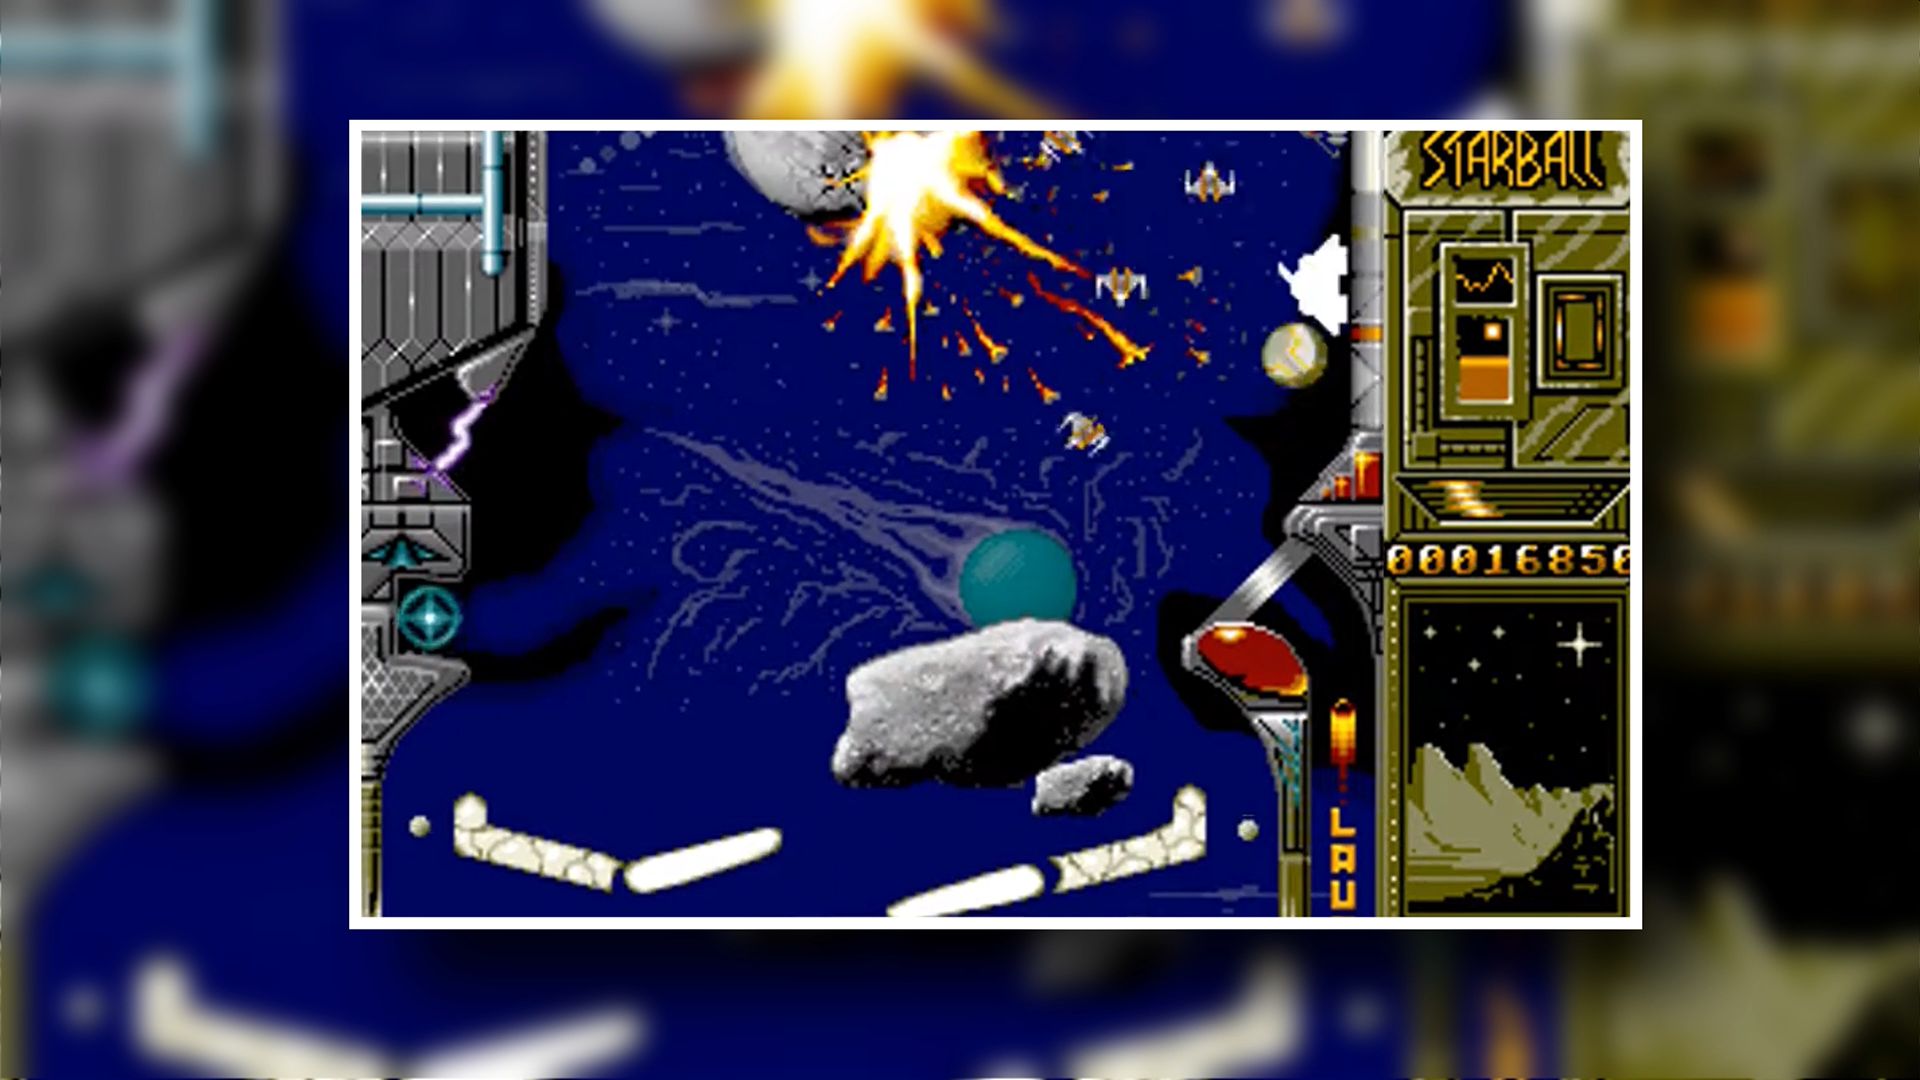 For the DOS version of Starball, Andy recreated the graphics in glorious 256 colors.